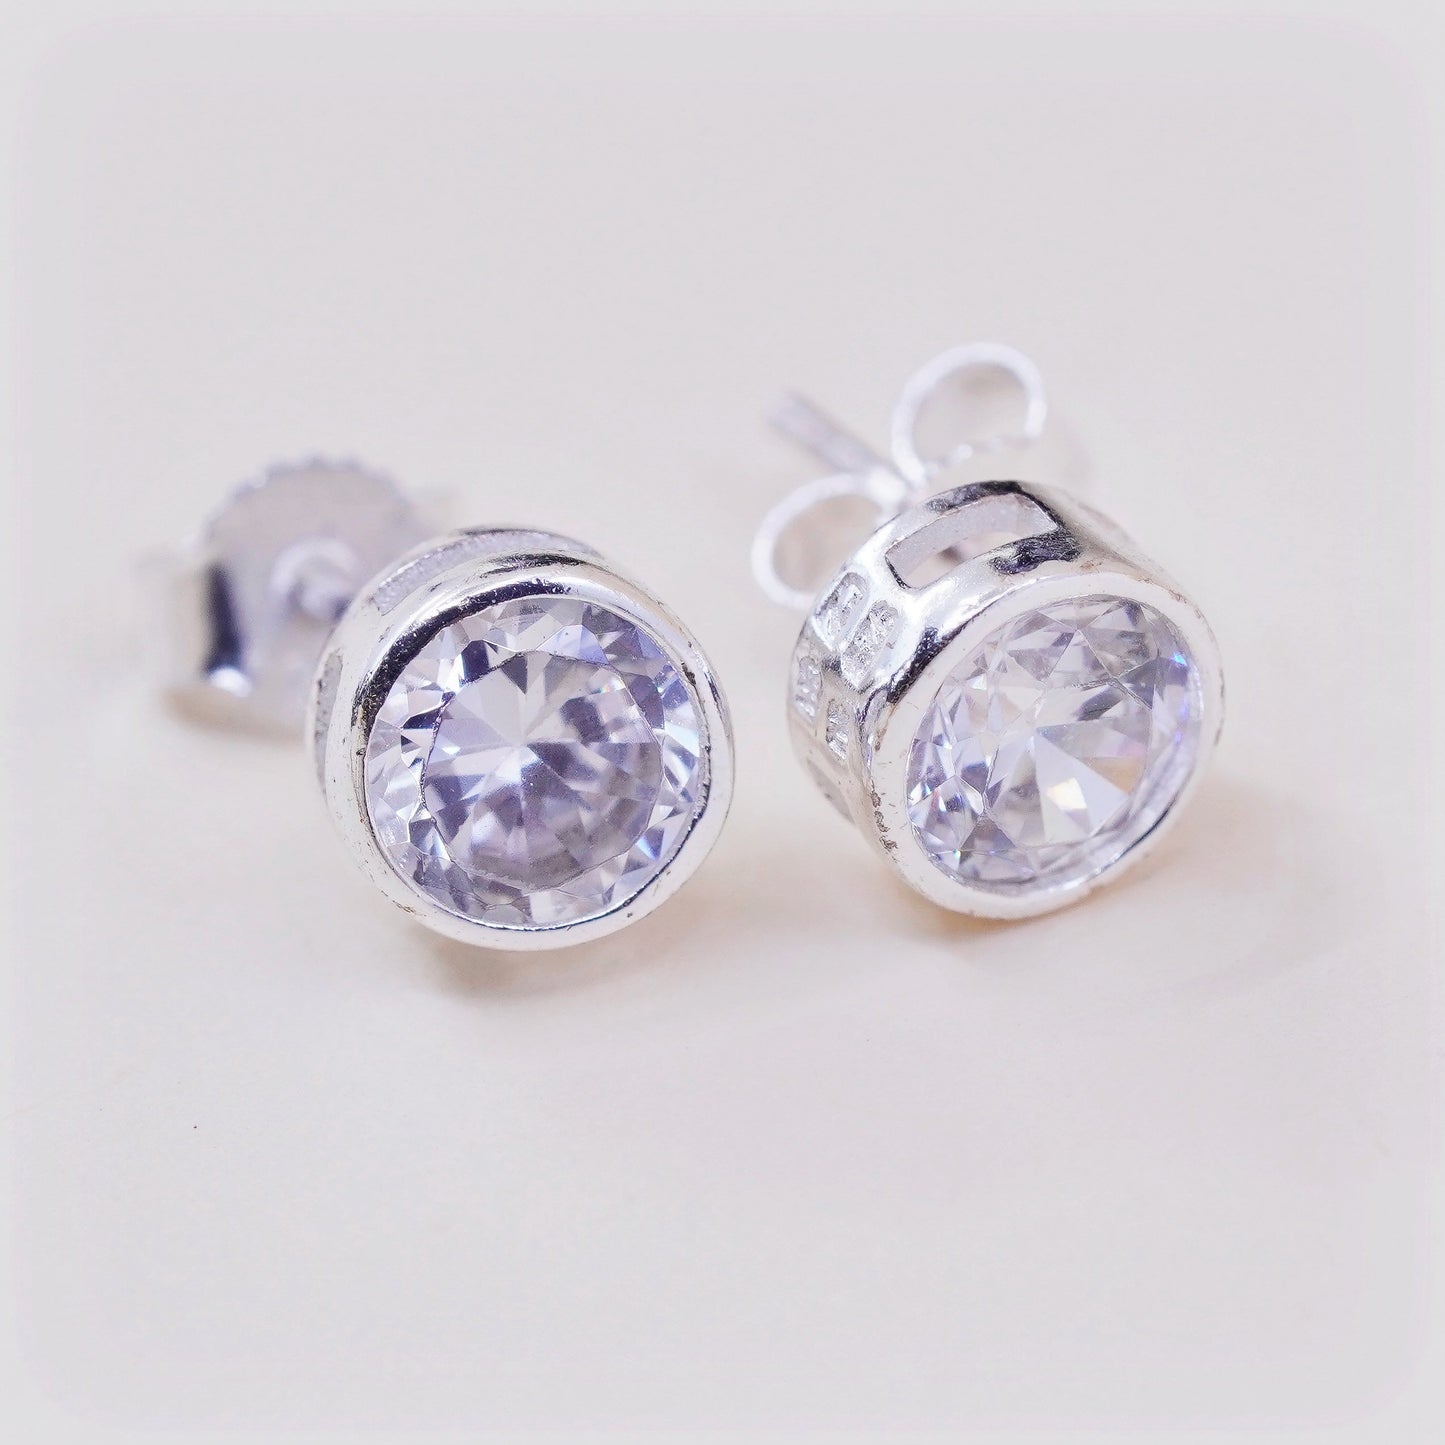 Vintage sterling silver square clear CZ studs, earrings